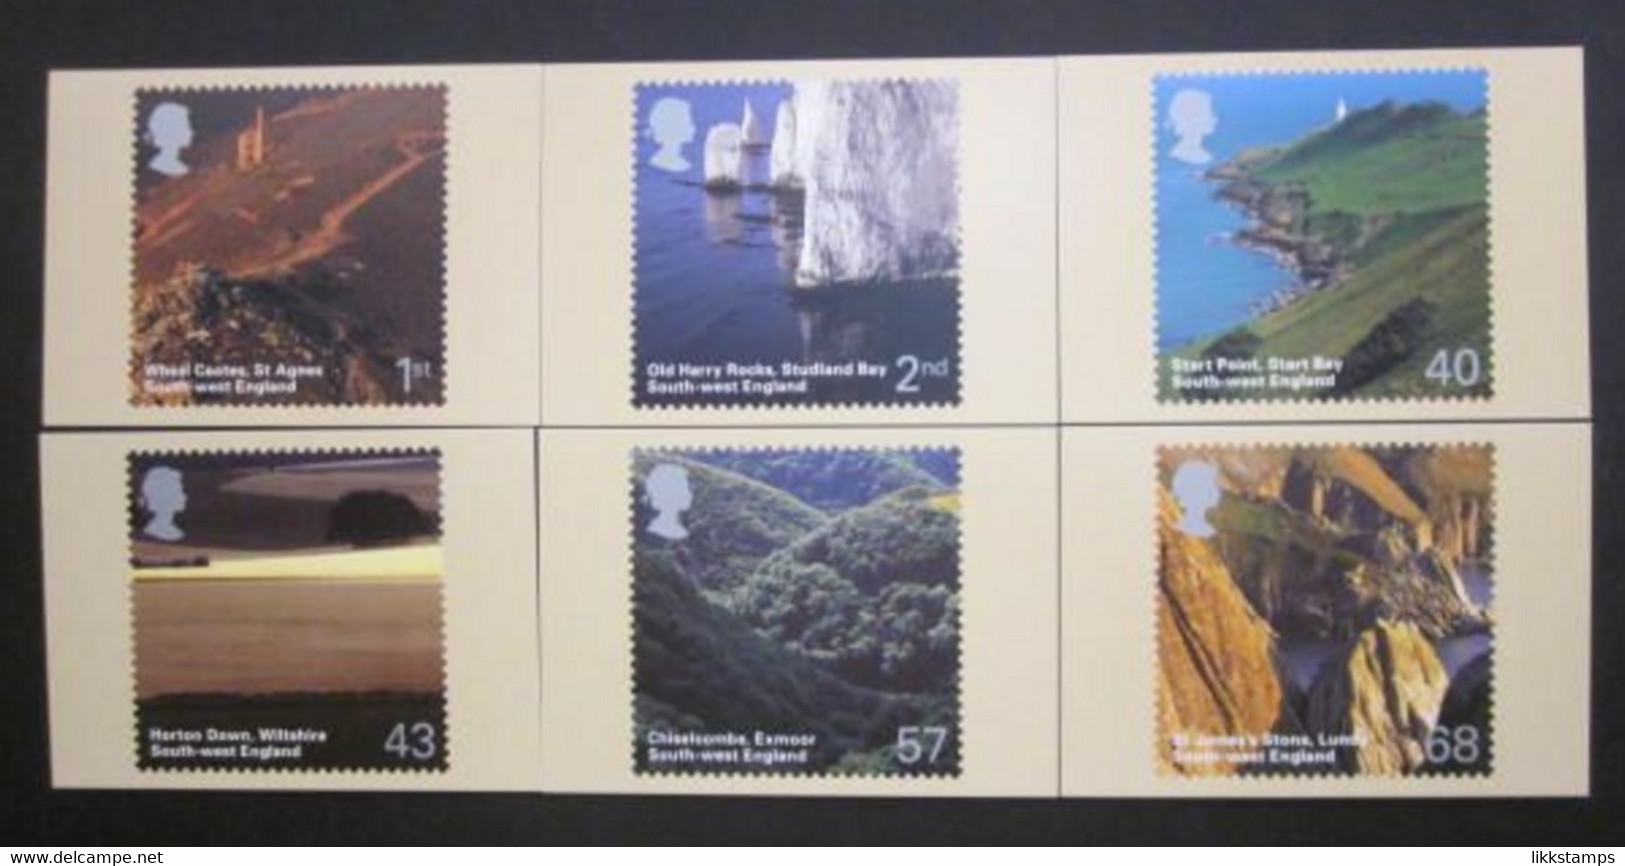 2005 SOUTH WEST ENGLAND P.H.Q. CARDS UNUSED, ISSUE No. 272 (B) #00844 - PHQ Cards